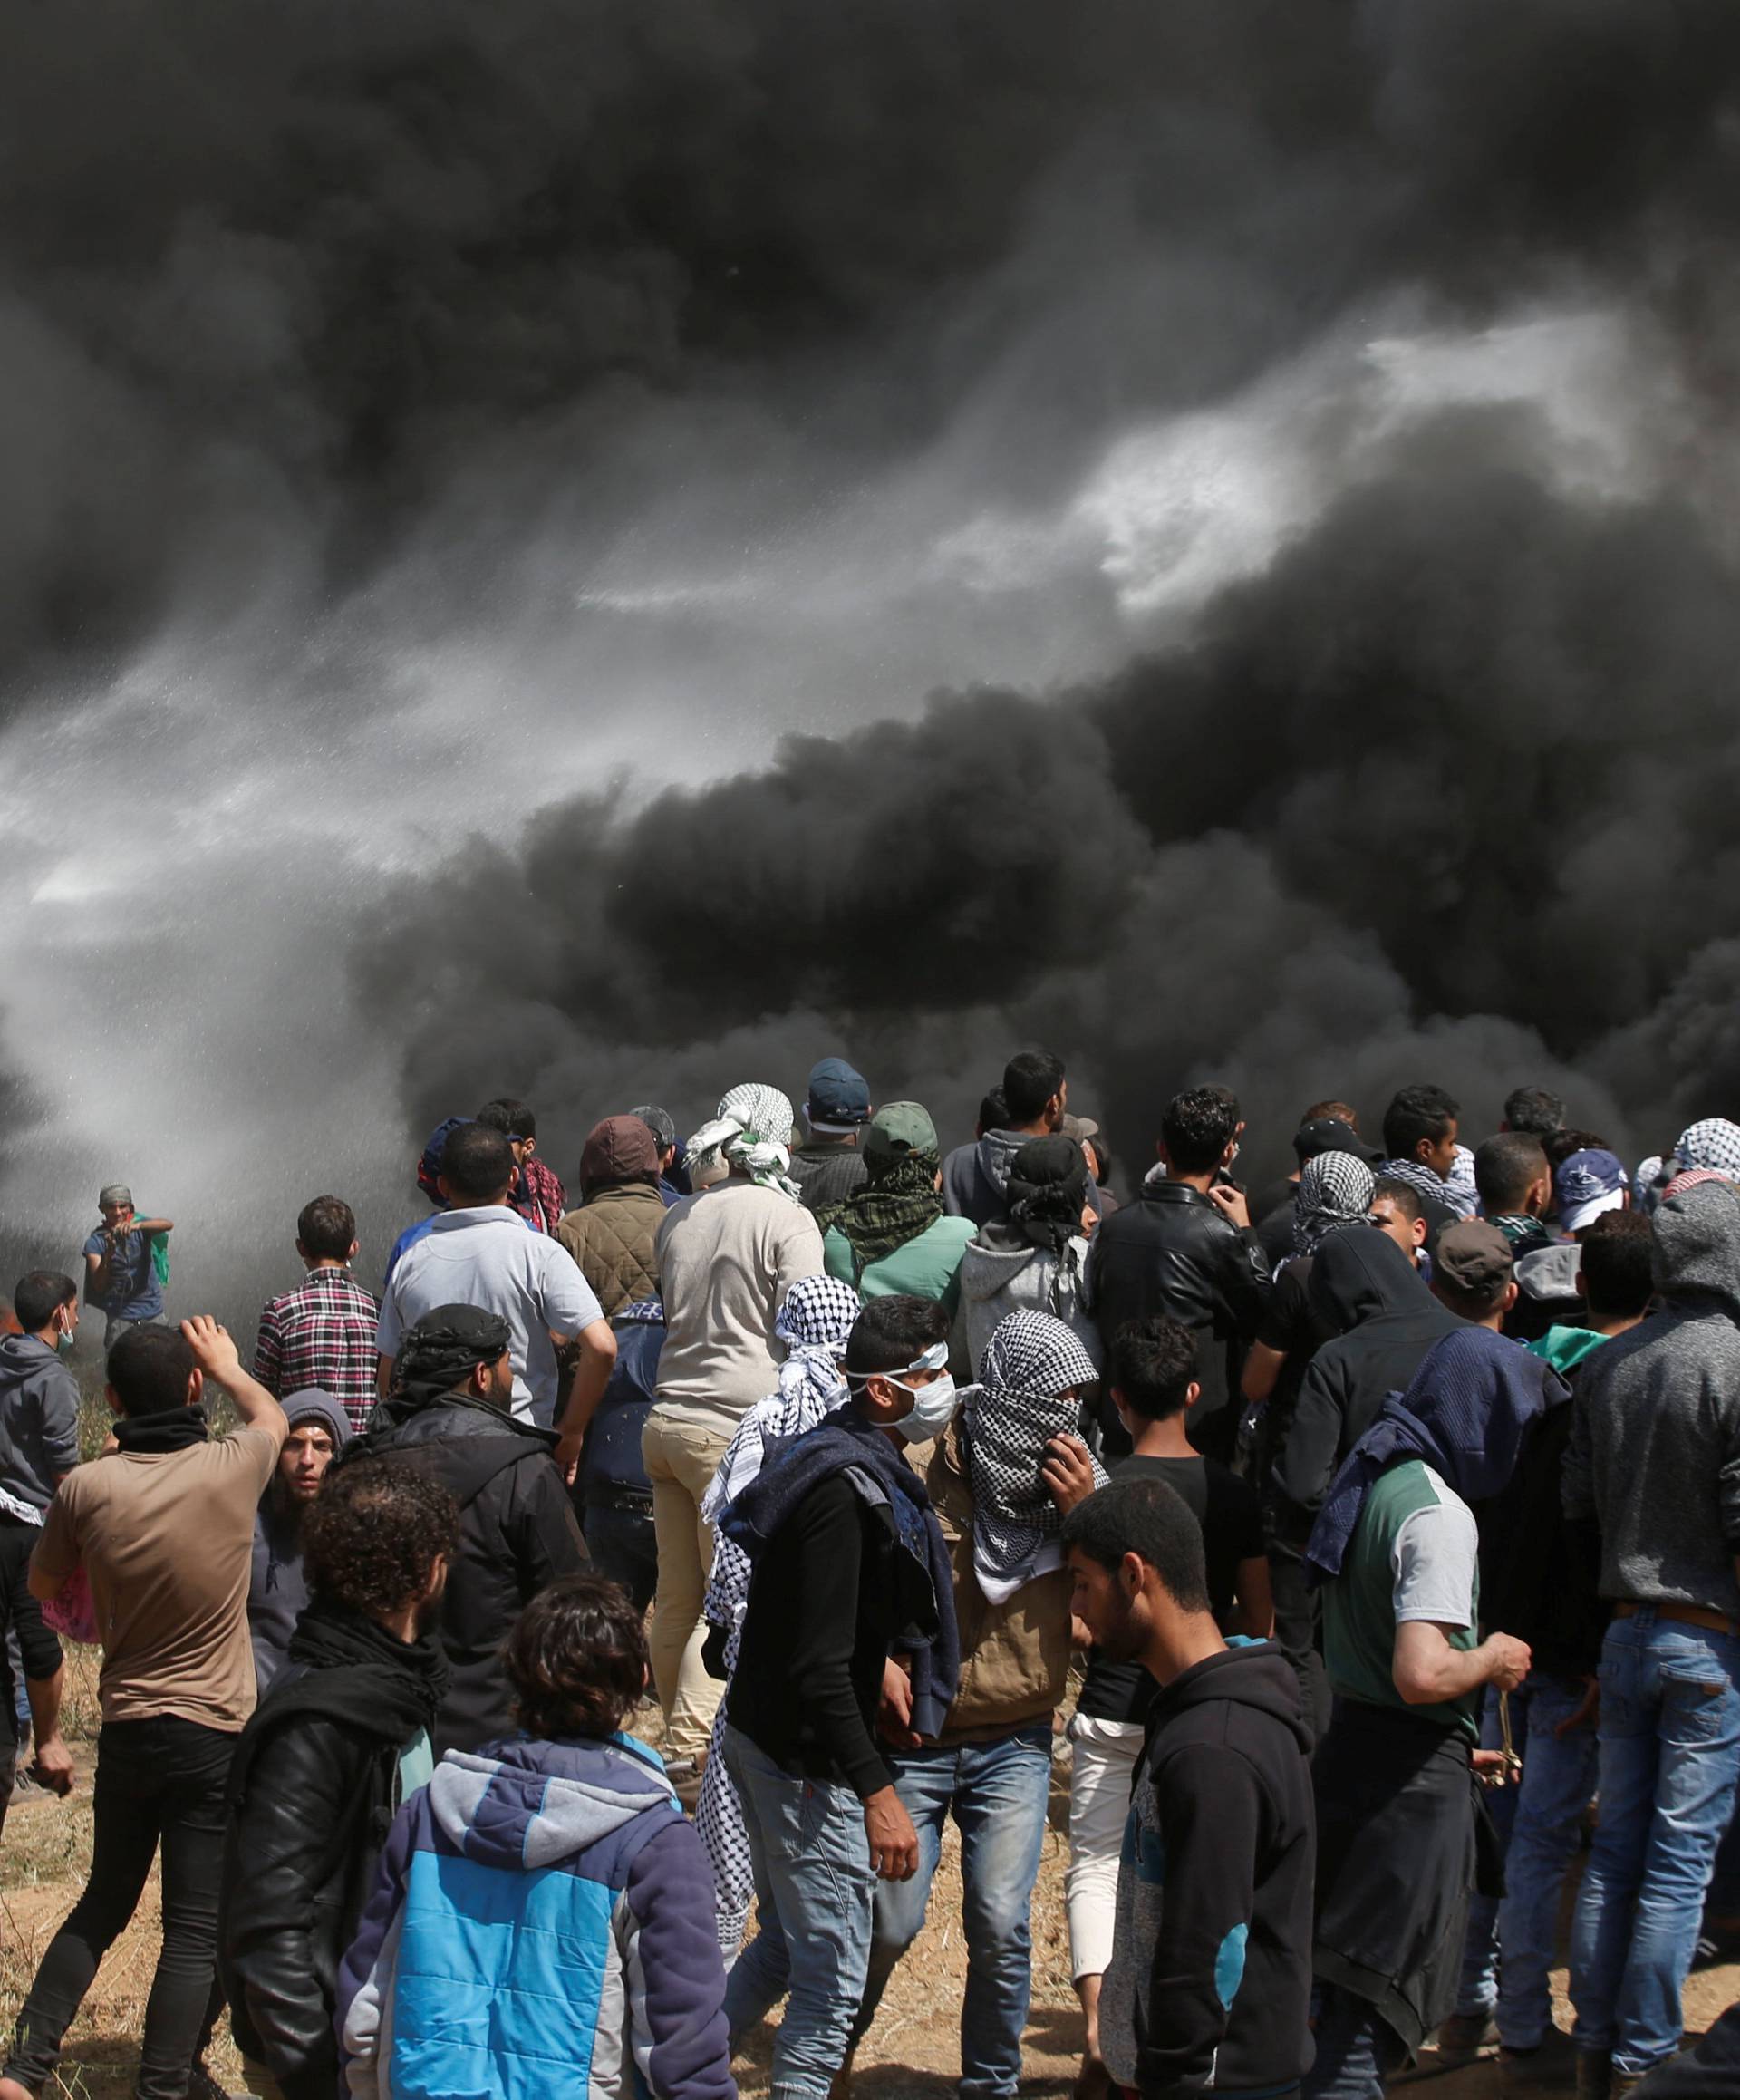 Palestinian demonstrators gather at the Israel-Gaza border during clashes with Israeli troops at a protest demanding the right to return to their homeland, east of Gaza City